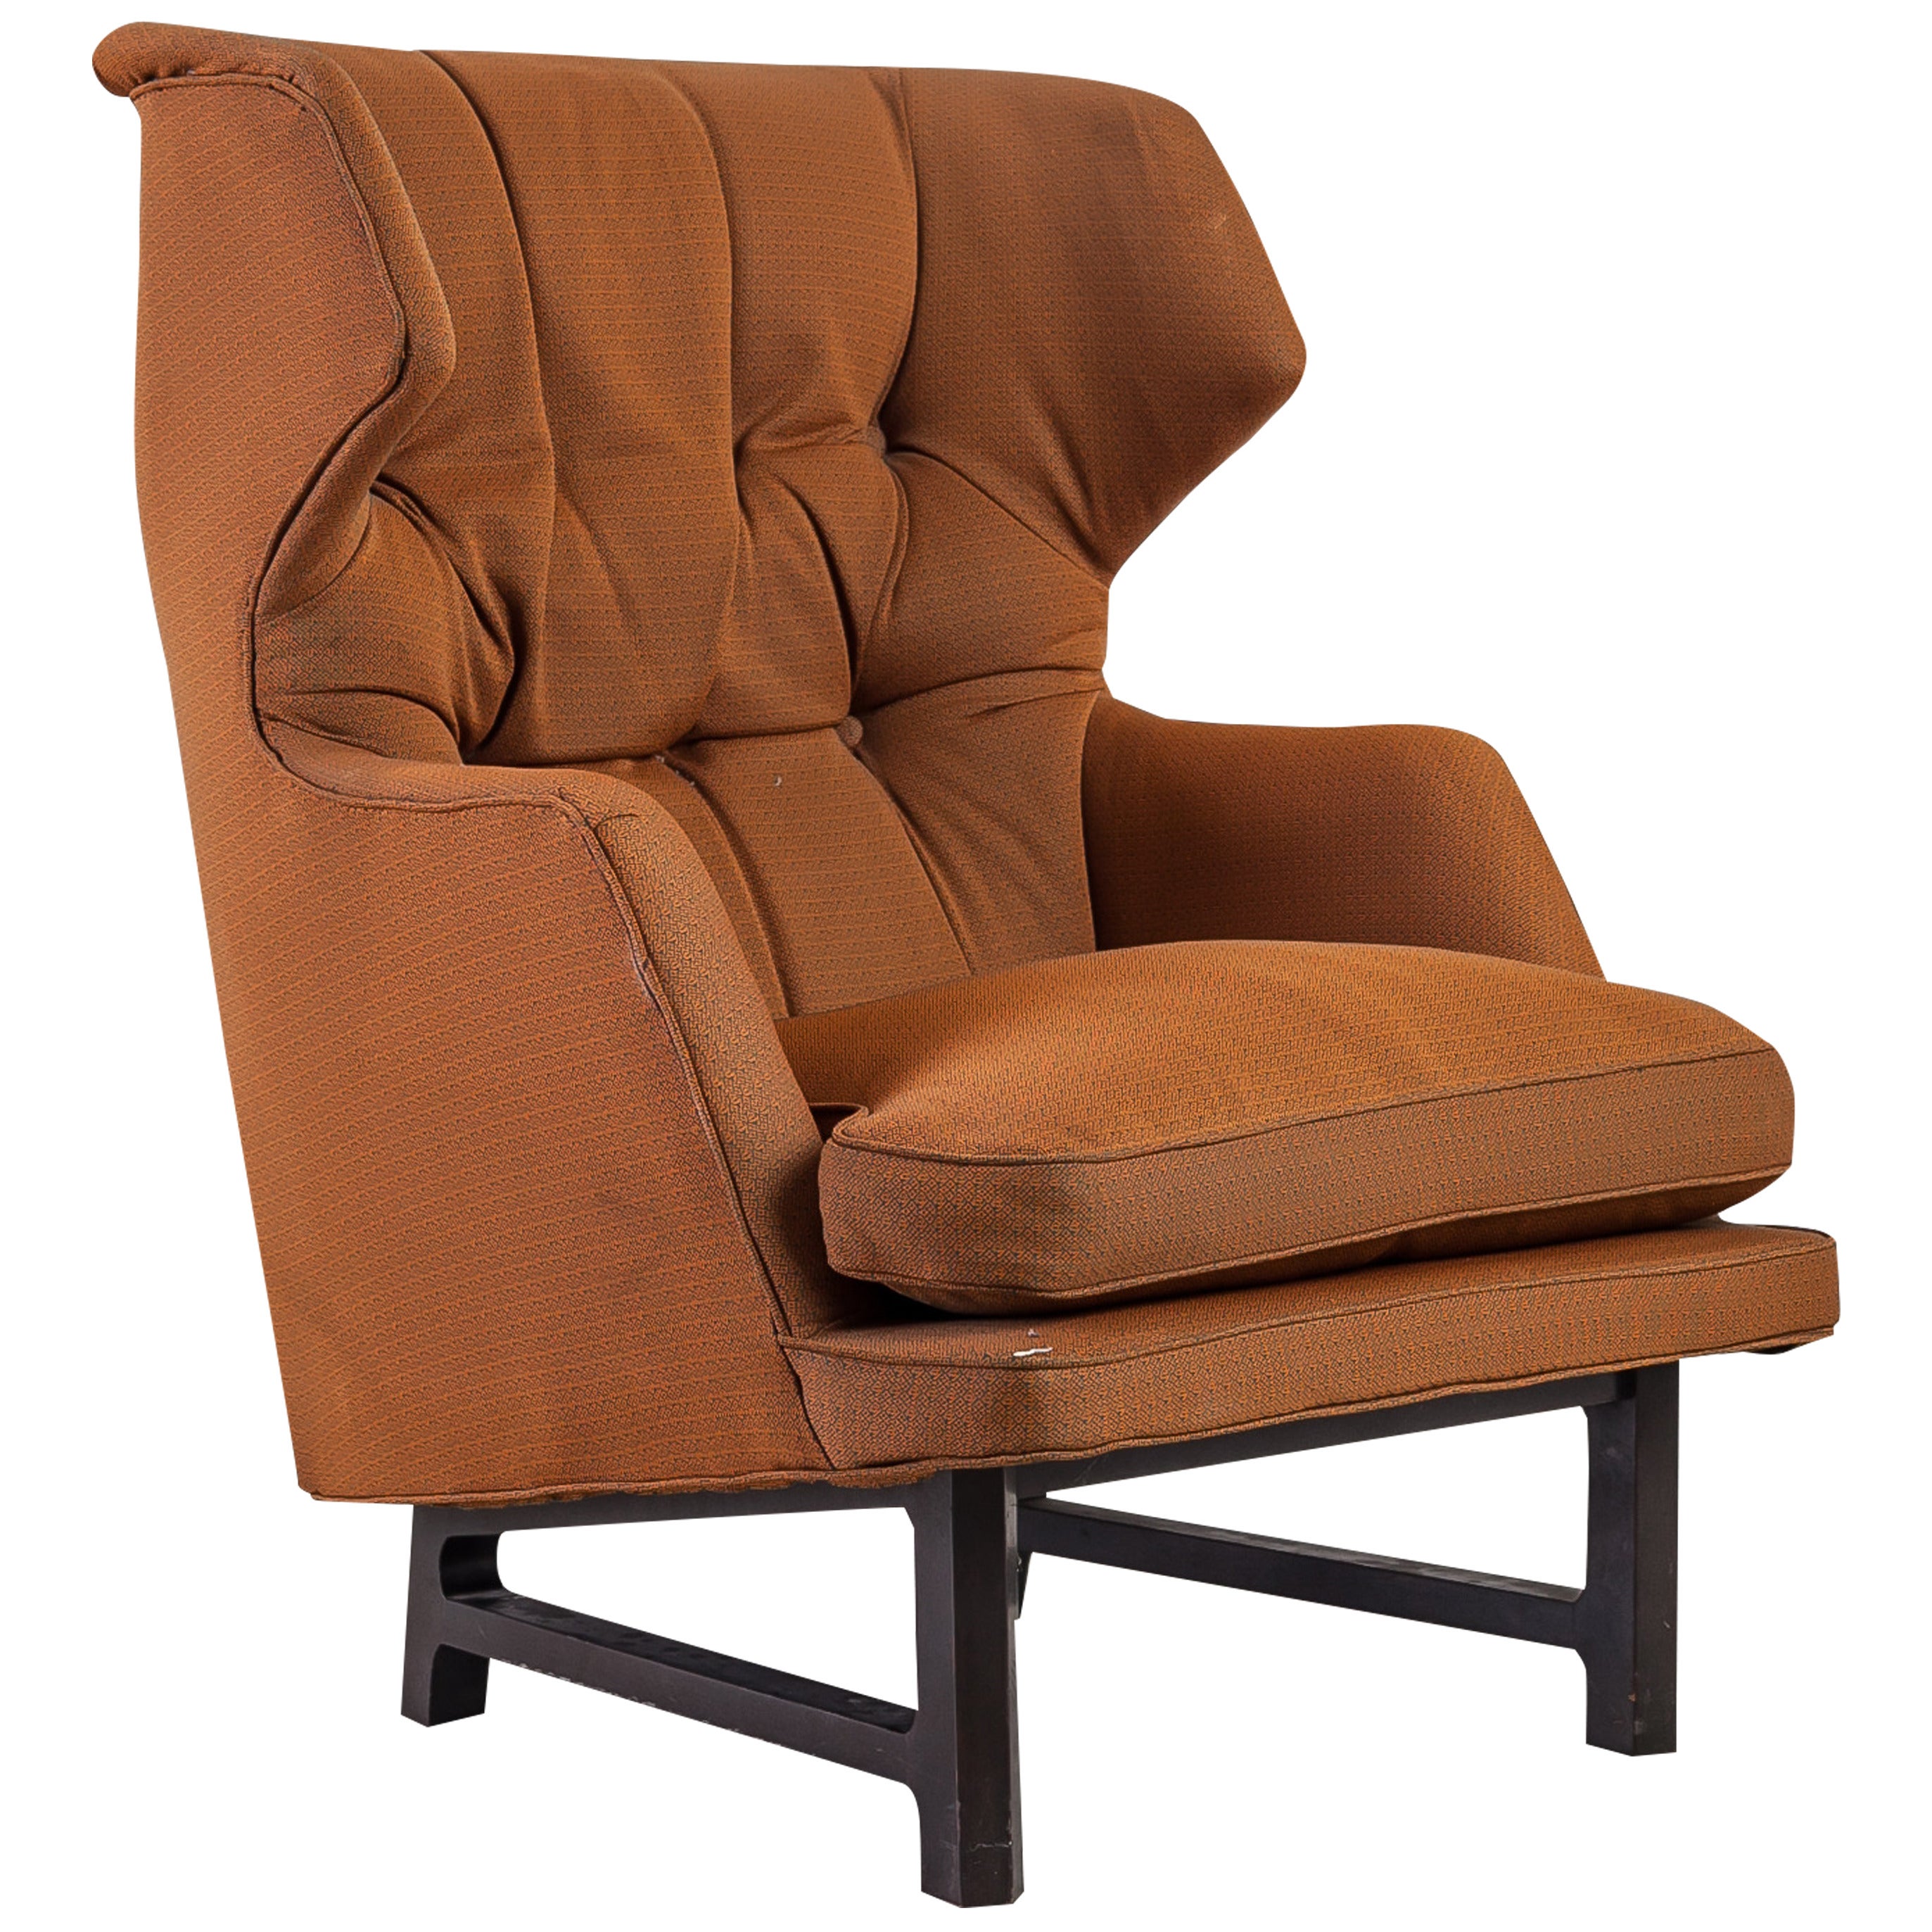 Edward Wormley Janus Wingback Lounge Chair for Dunbar For Sale